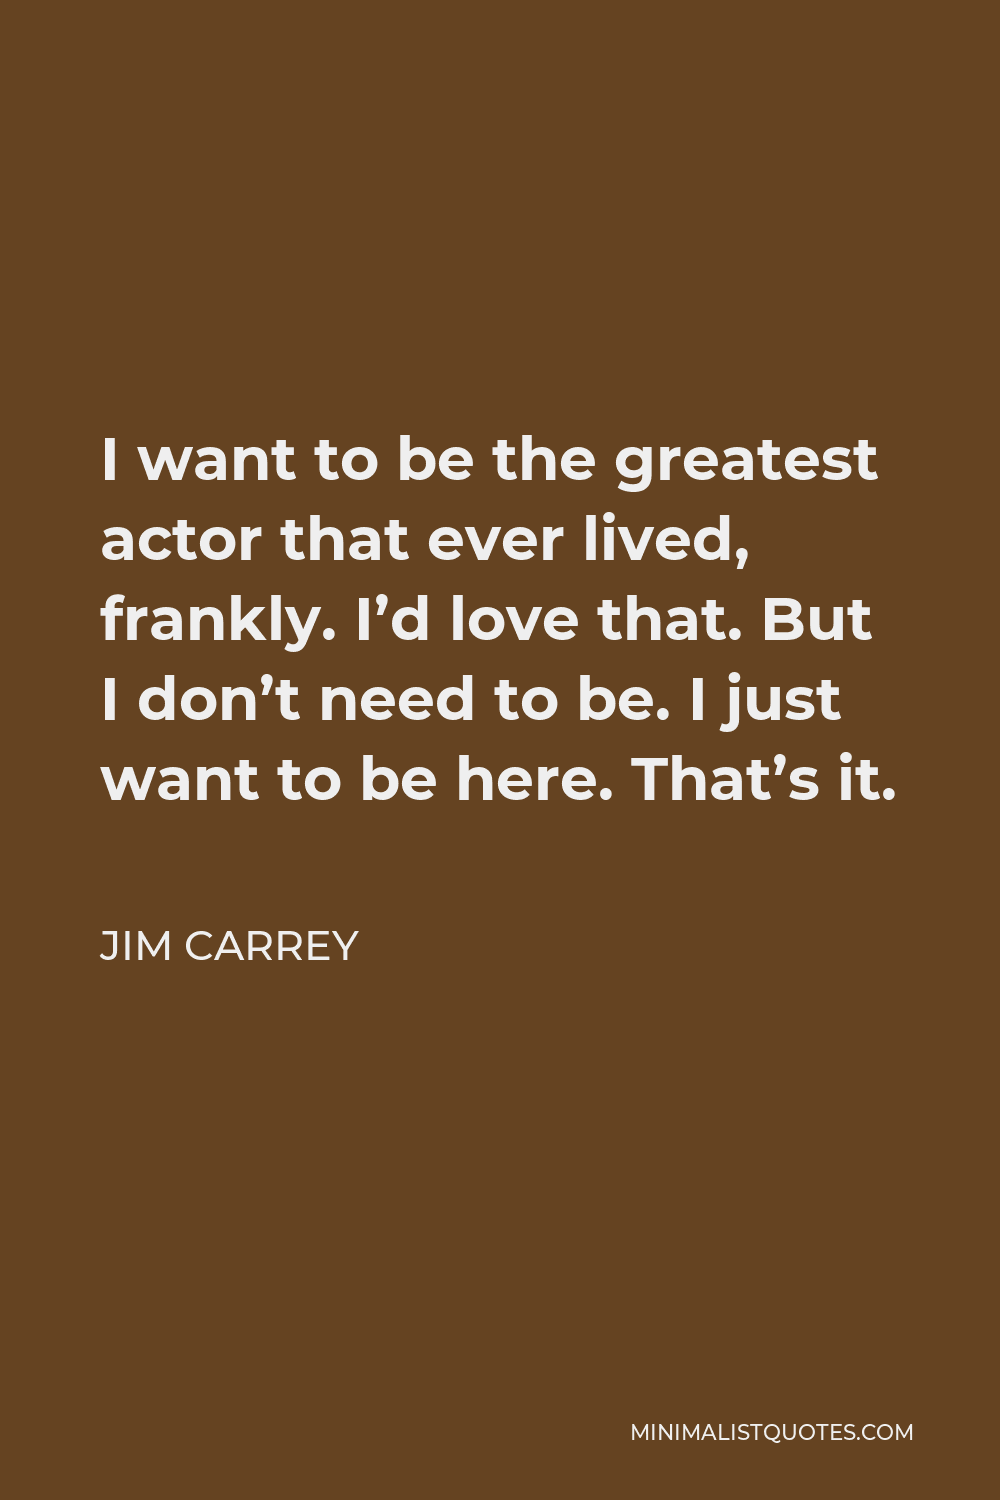 Jim Carrey Quote - I want to be the greatest actor that ever lived, frankly. I’d love that. But I don’t need to be. I just want to be here. That’s it.